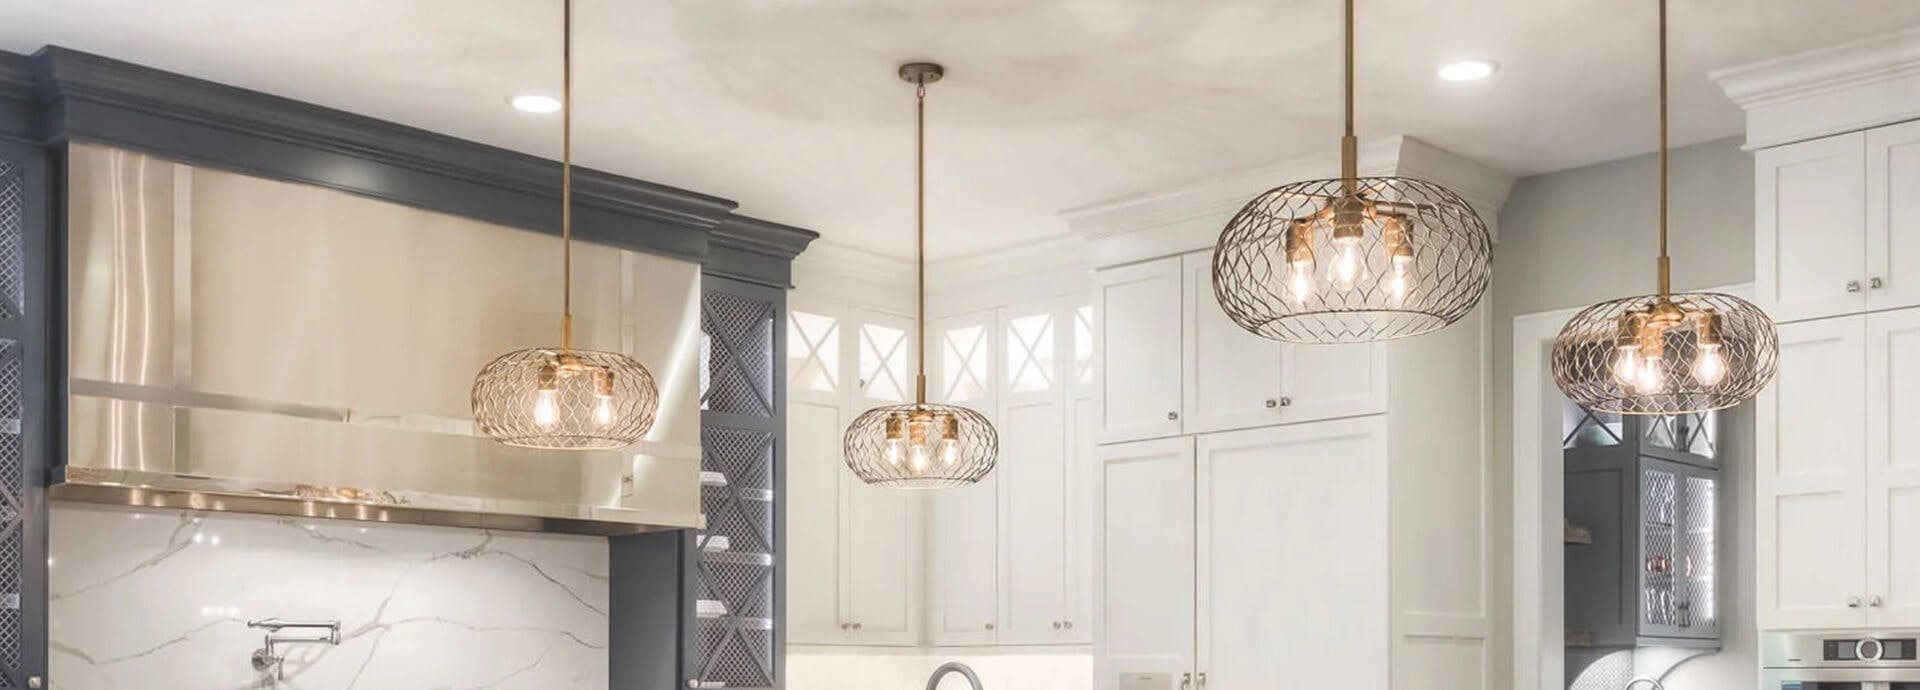 Four Devin pendant lights in gold finish hanging in a farmhouse style white kitchen